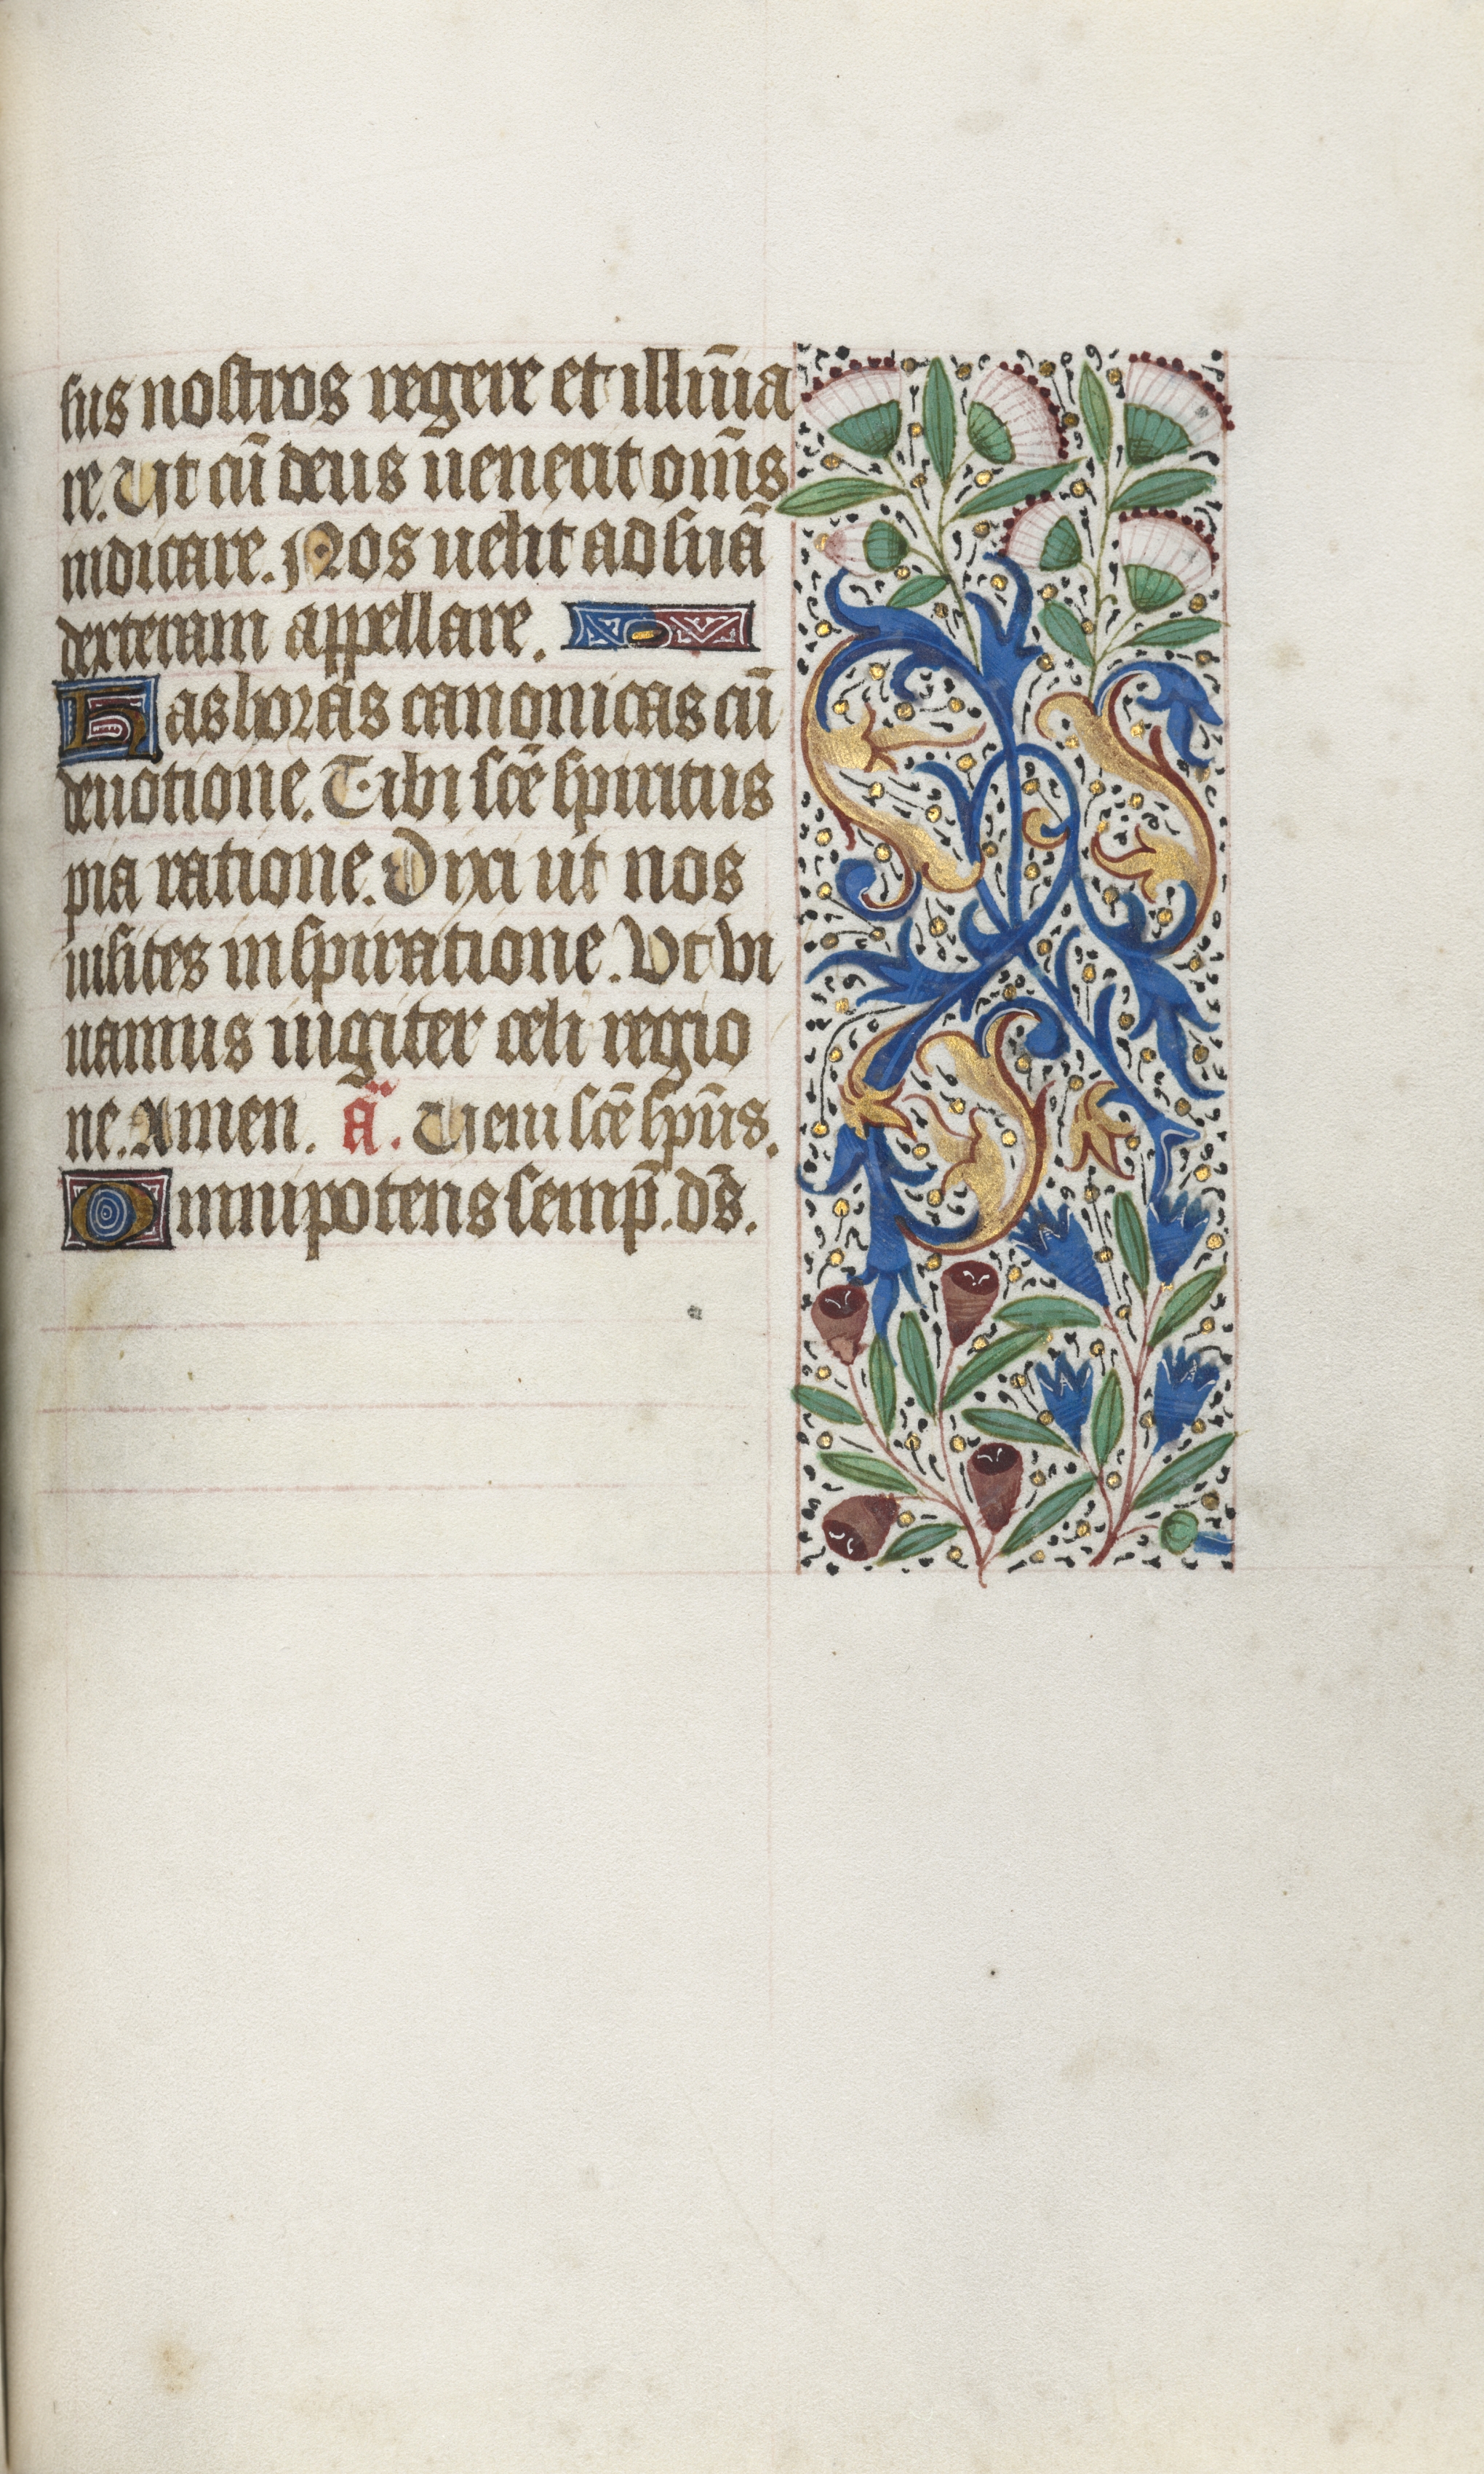 Book of Hours (Use of Rouen): fol. 102r